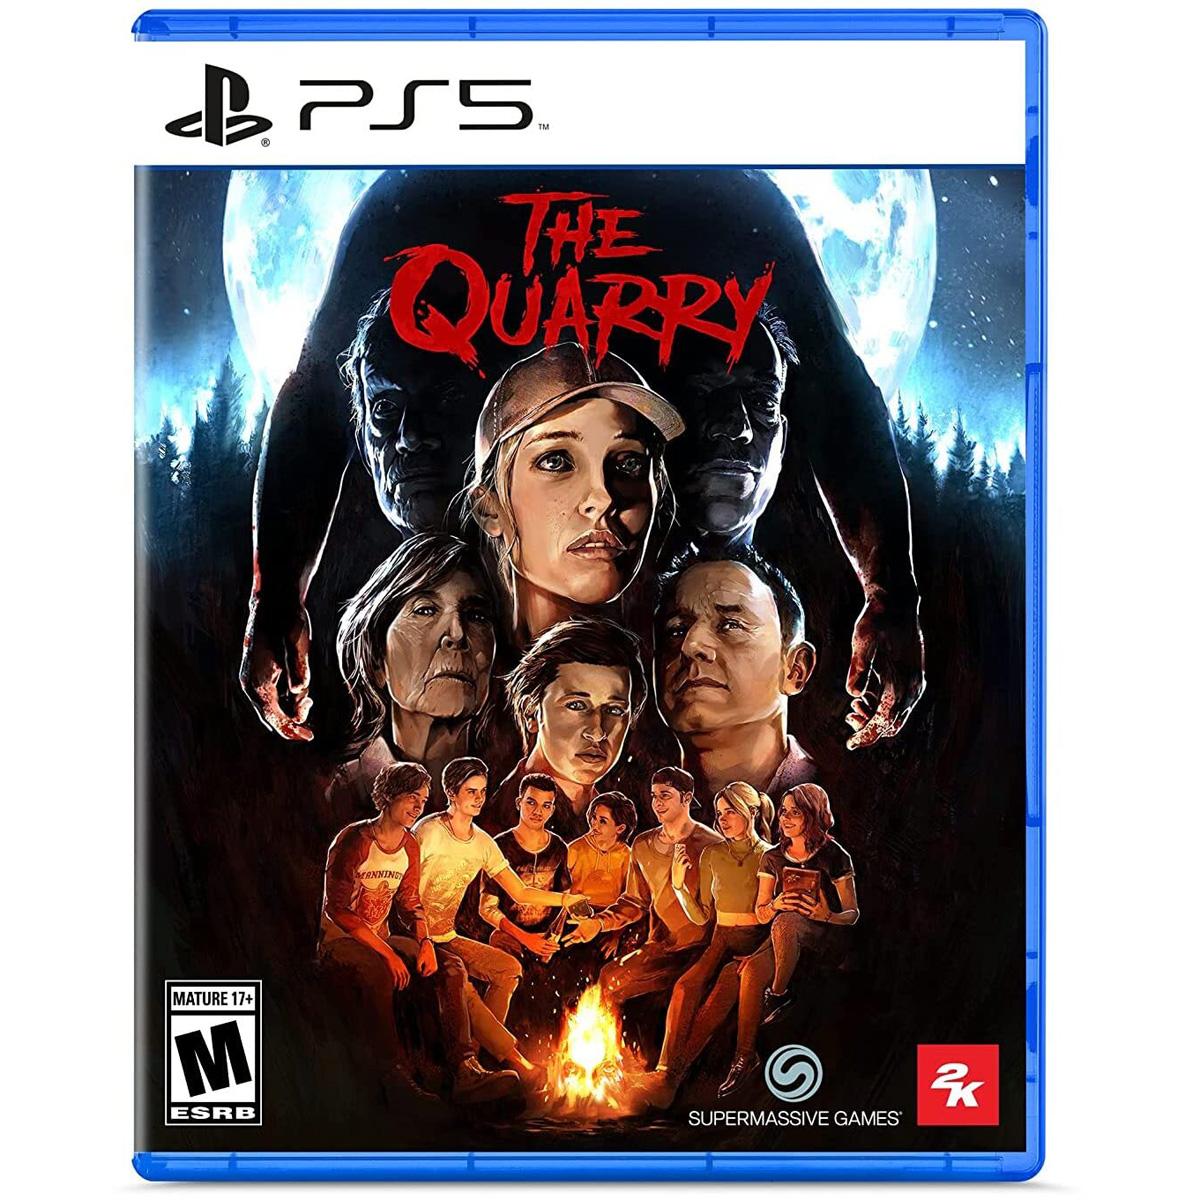 The Quarry PS5 for $9.99